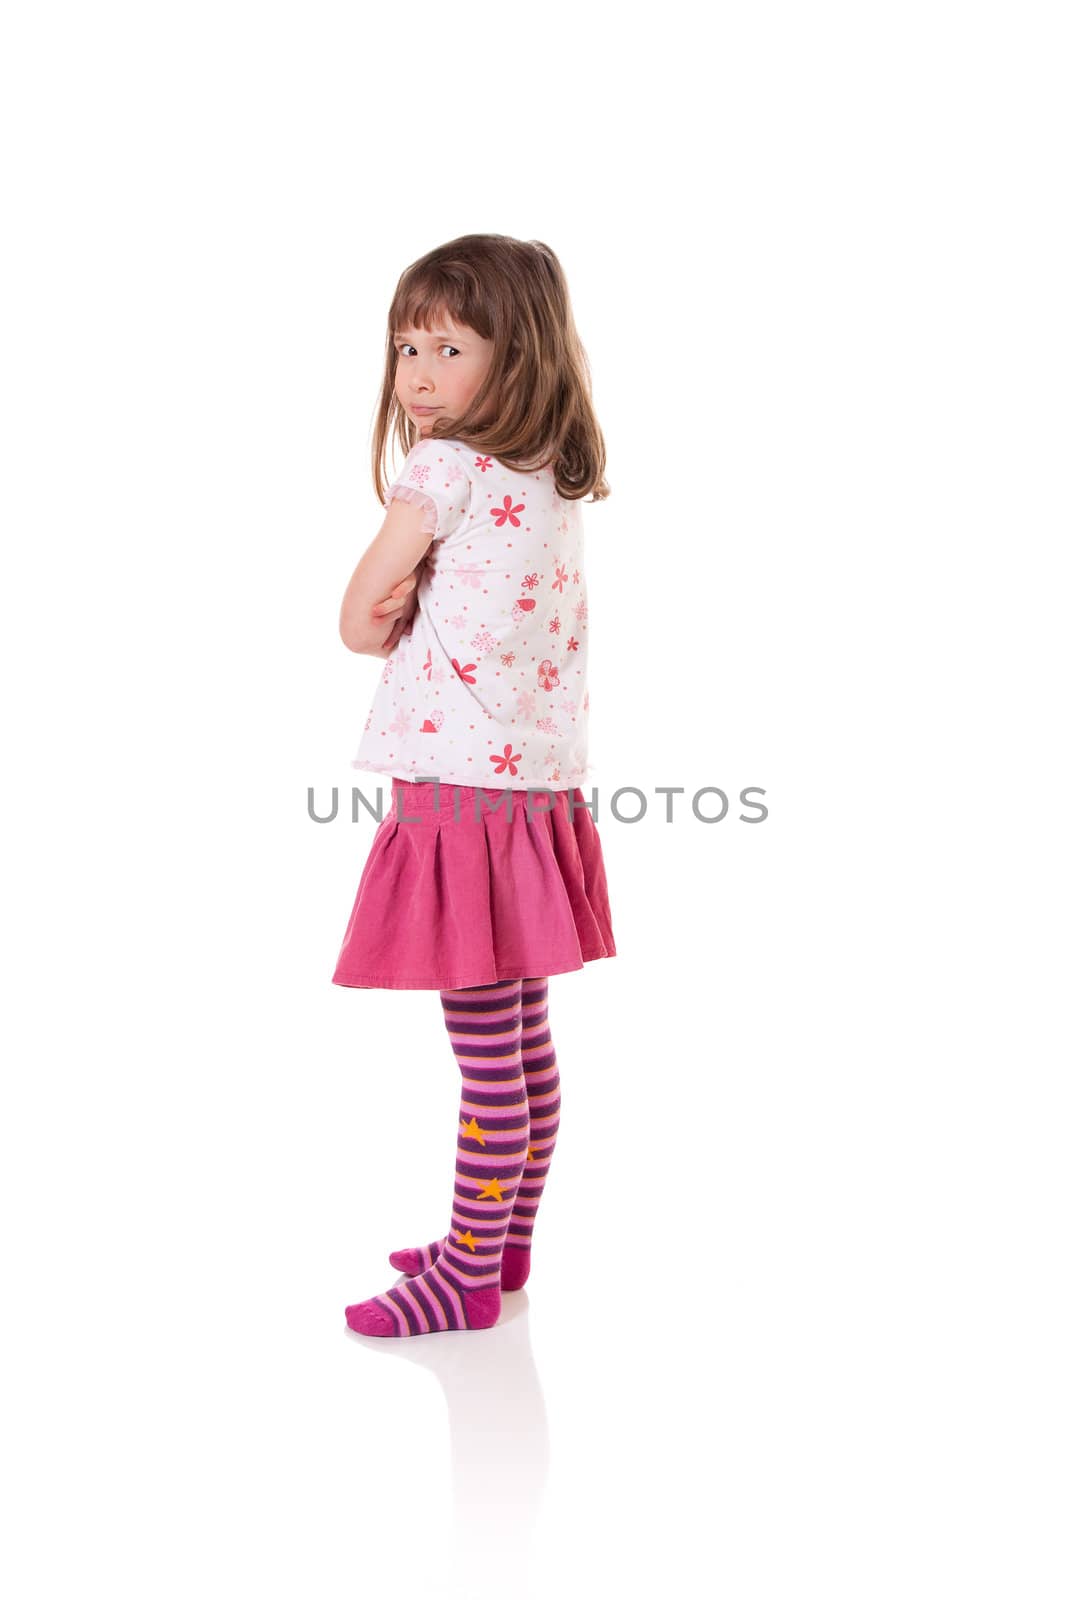 Cute little girl in a bad-tempered mood